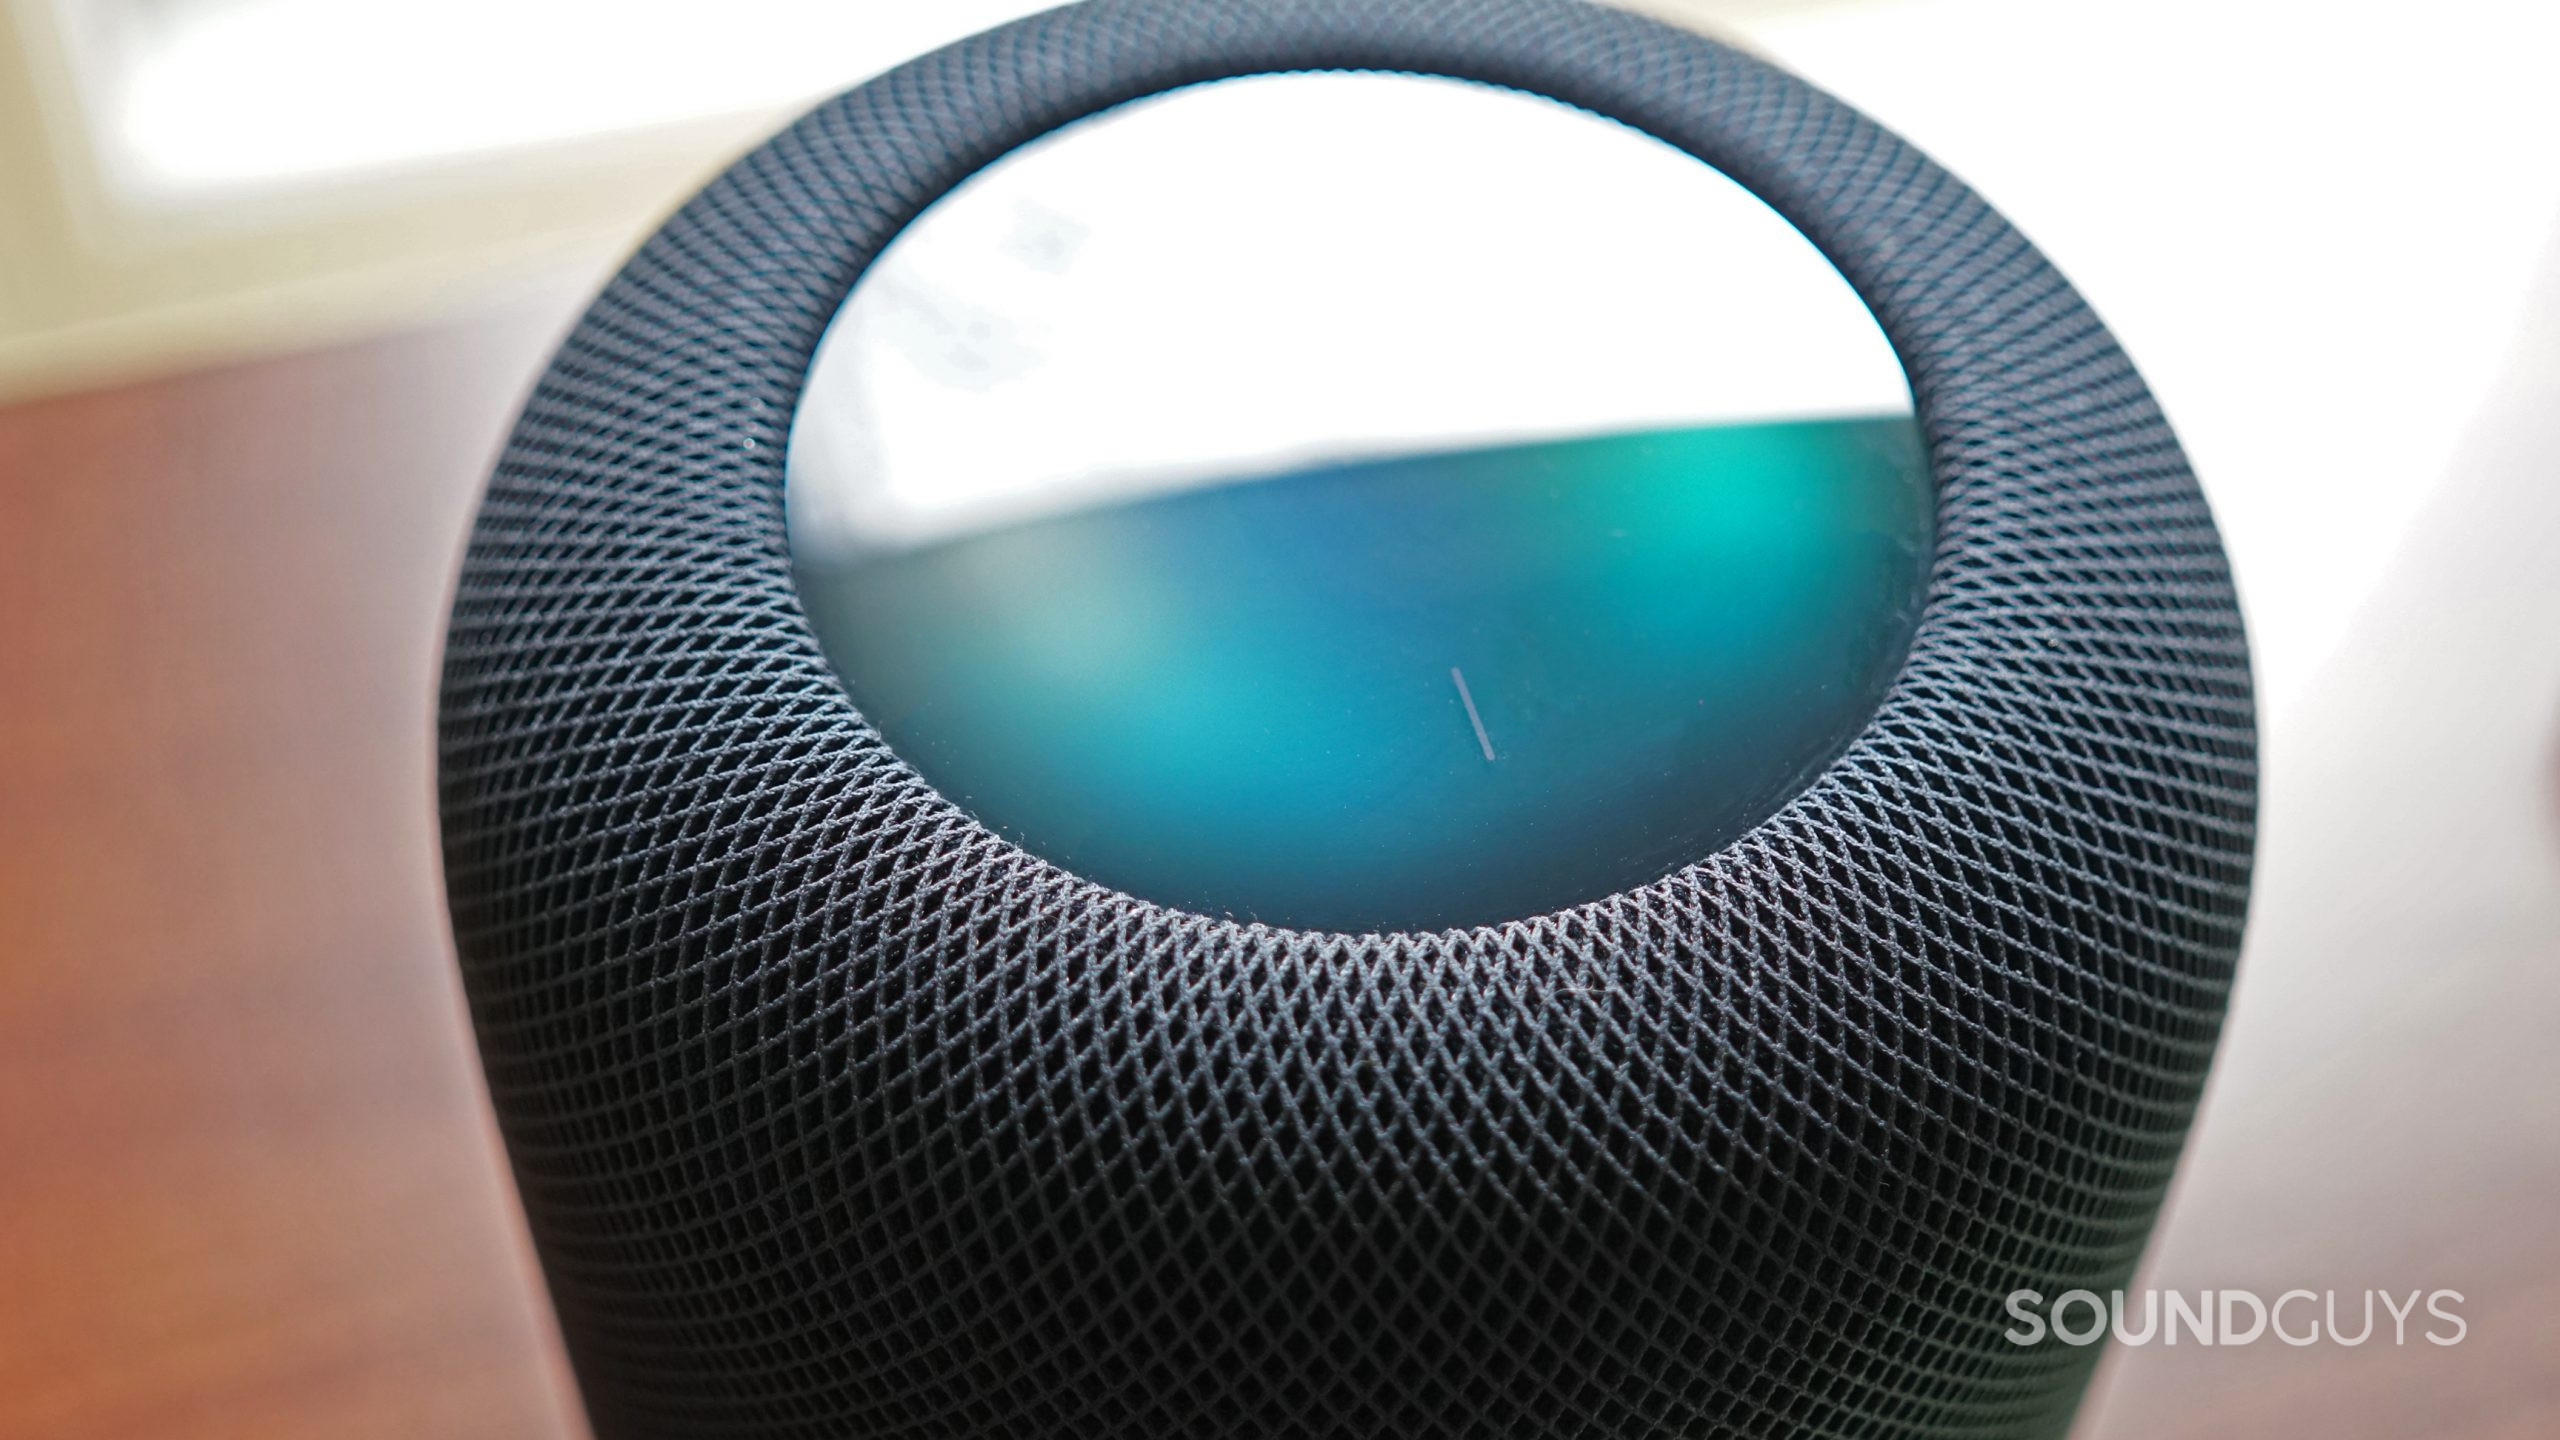 A closeup shot of the Apple HomePod (2nd Generation) touch display shows colors as it plays music.